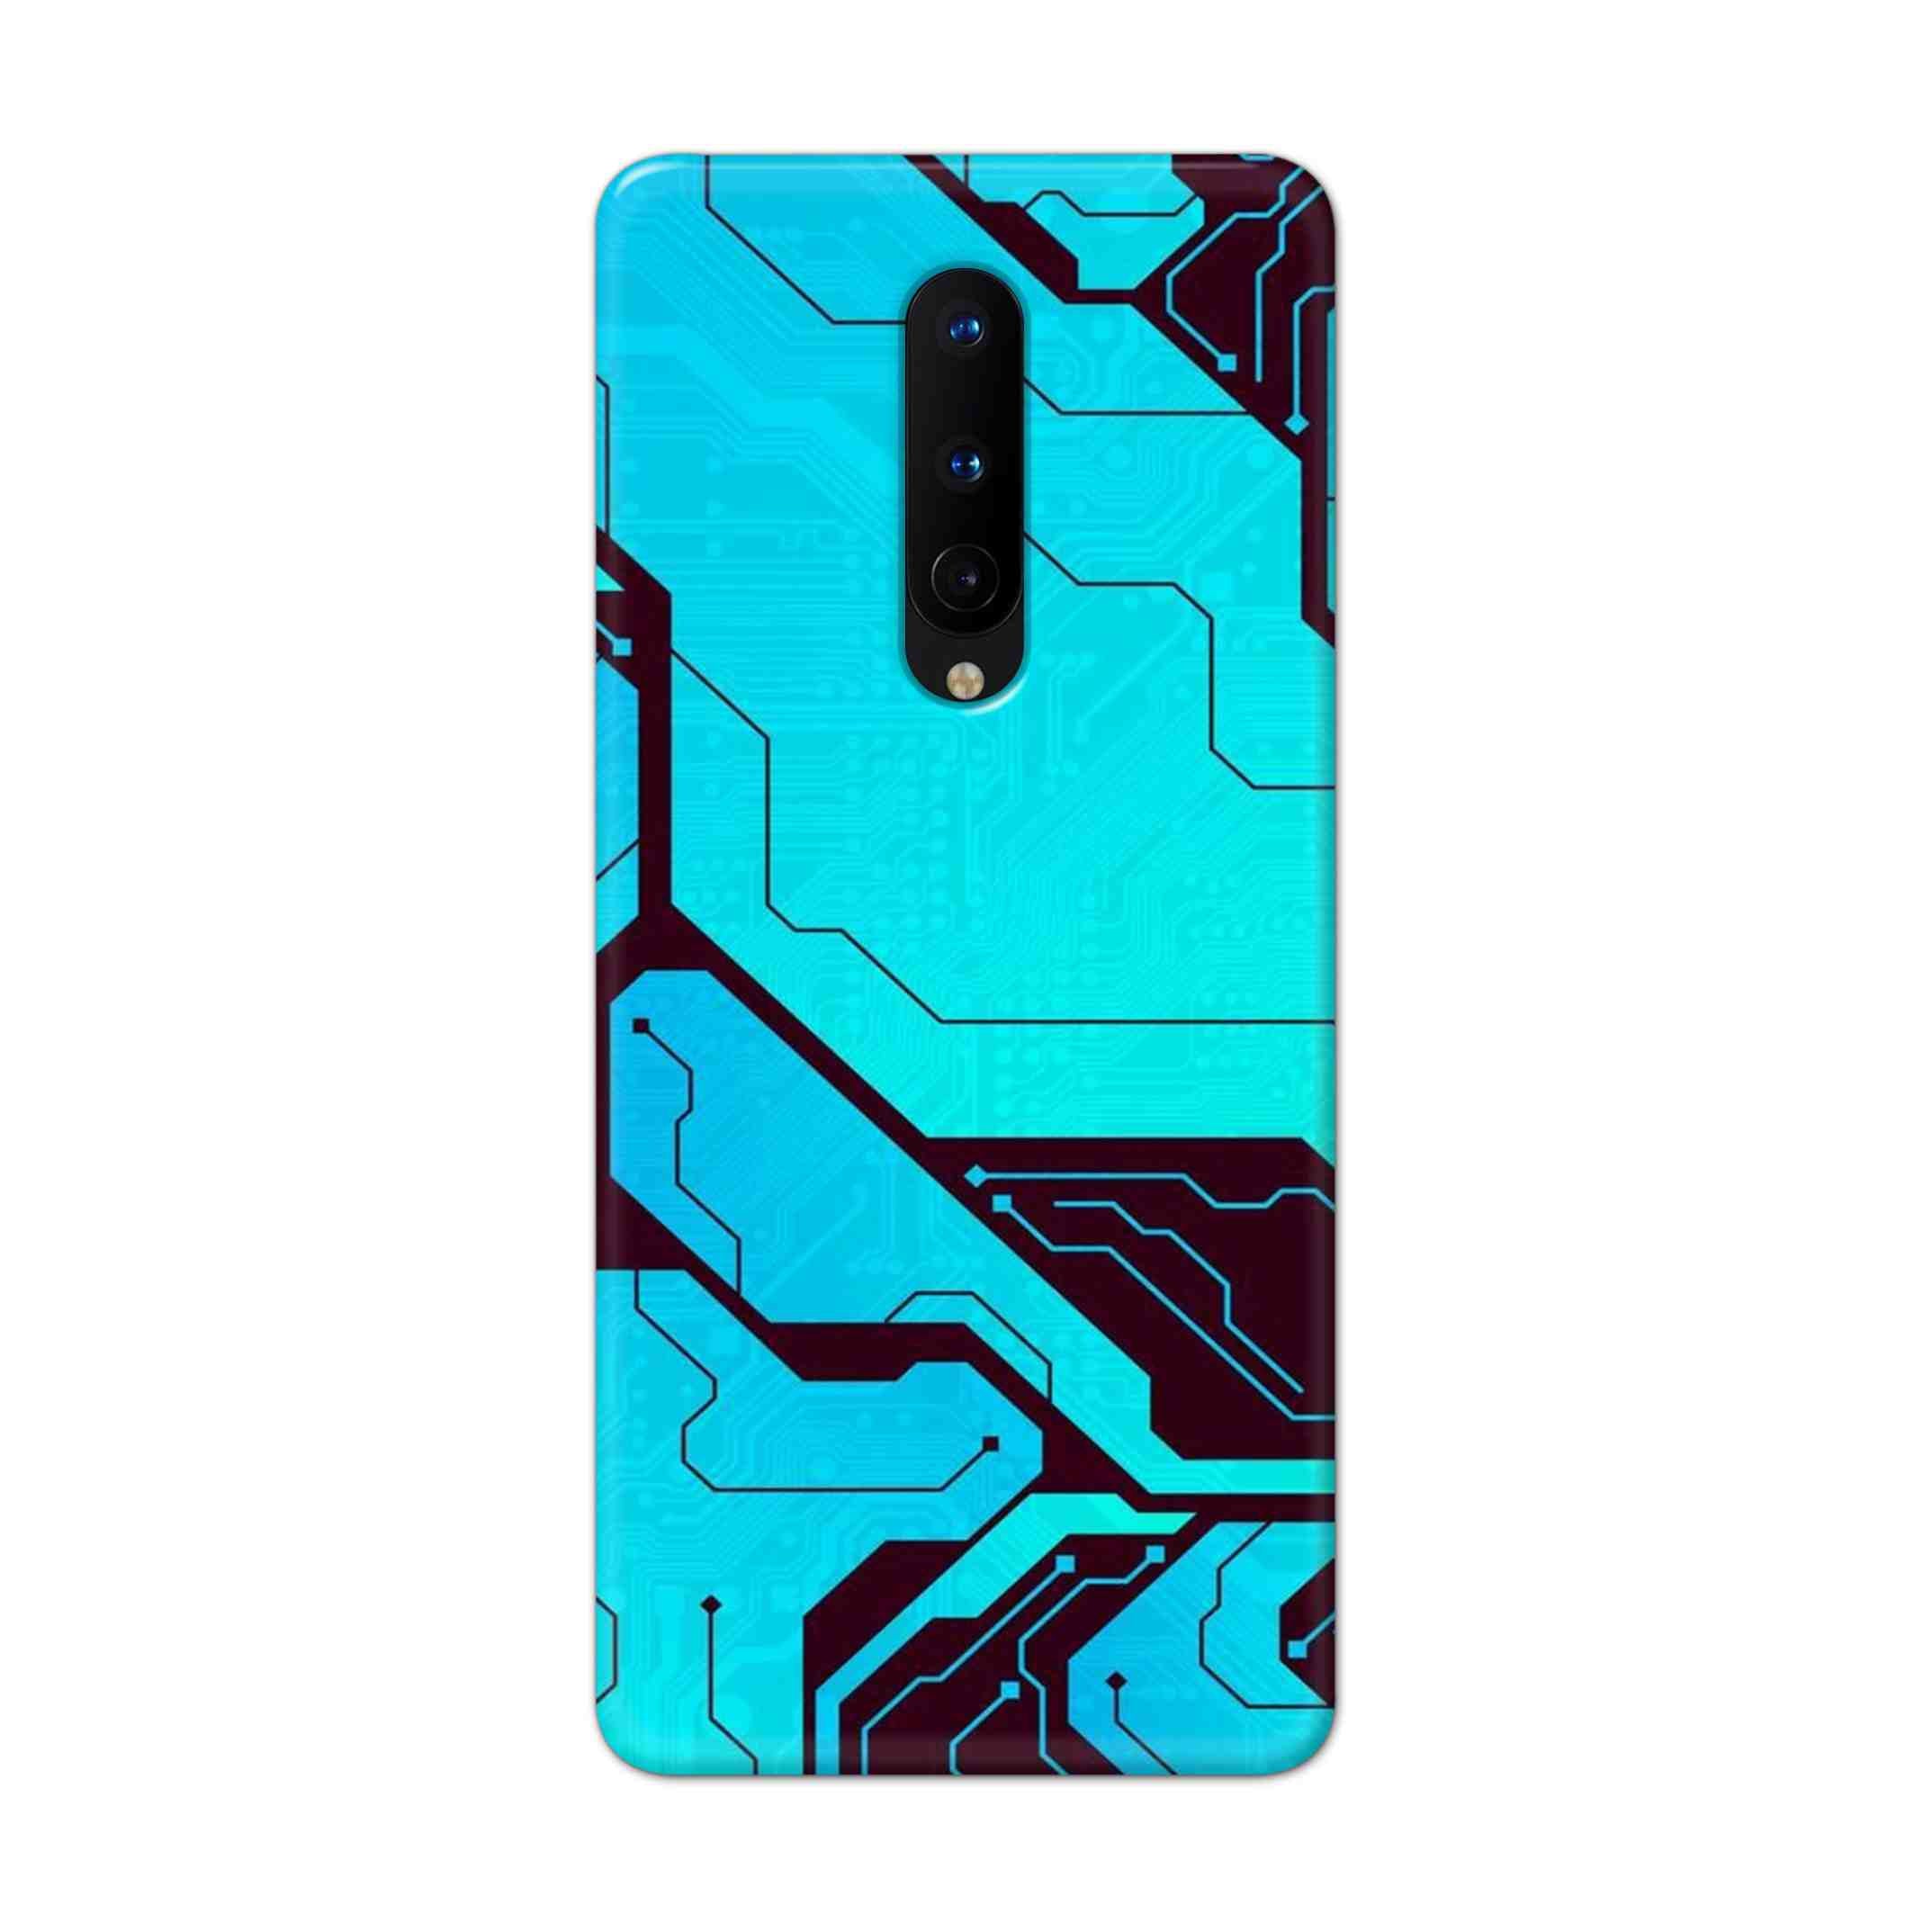 Buy Futuristic Line Hard Back Mobile Phone Case Cover For OnePlus 8 Online